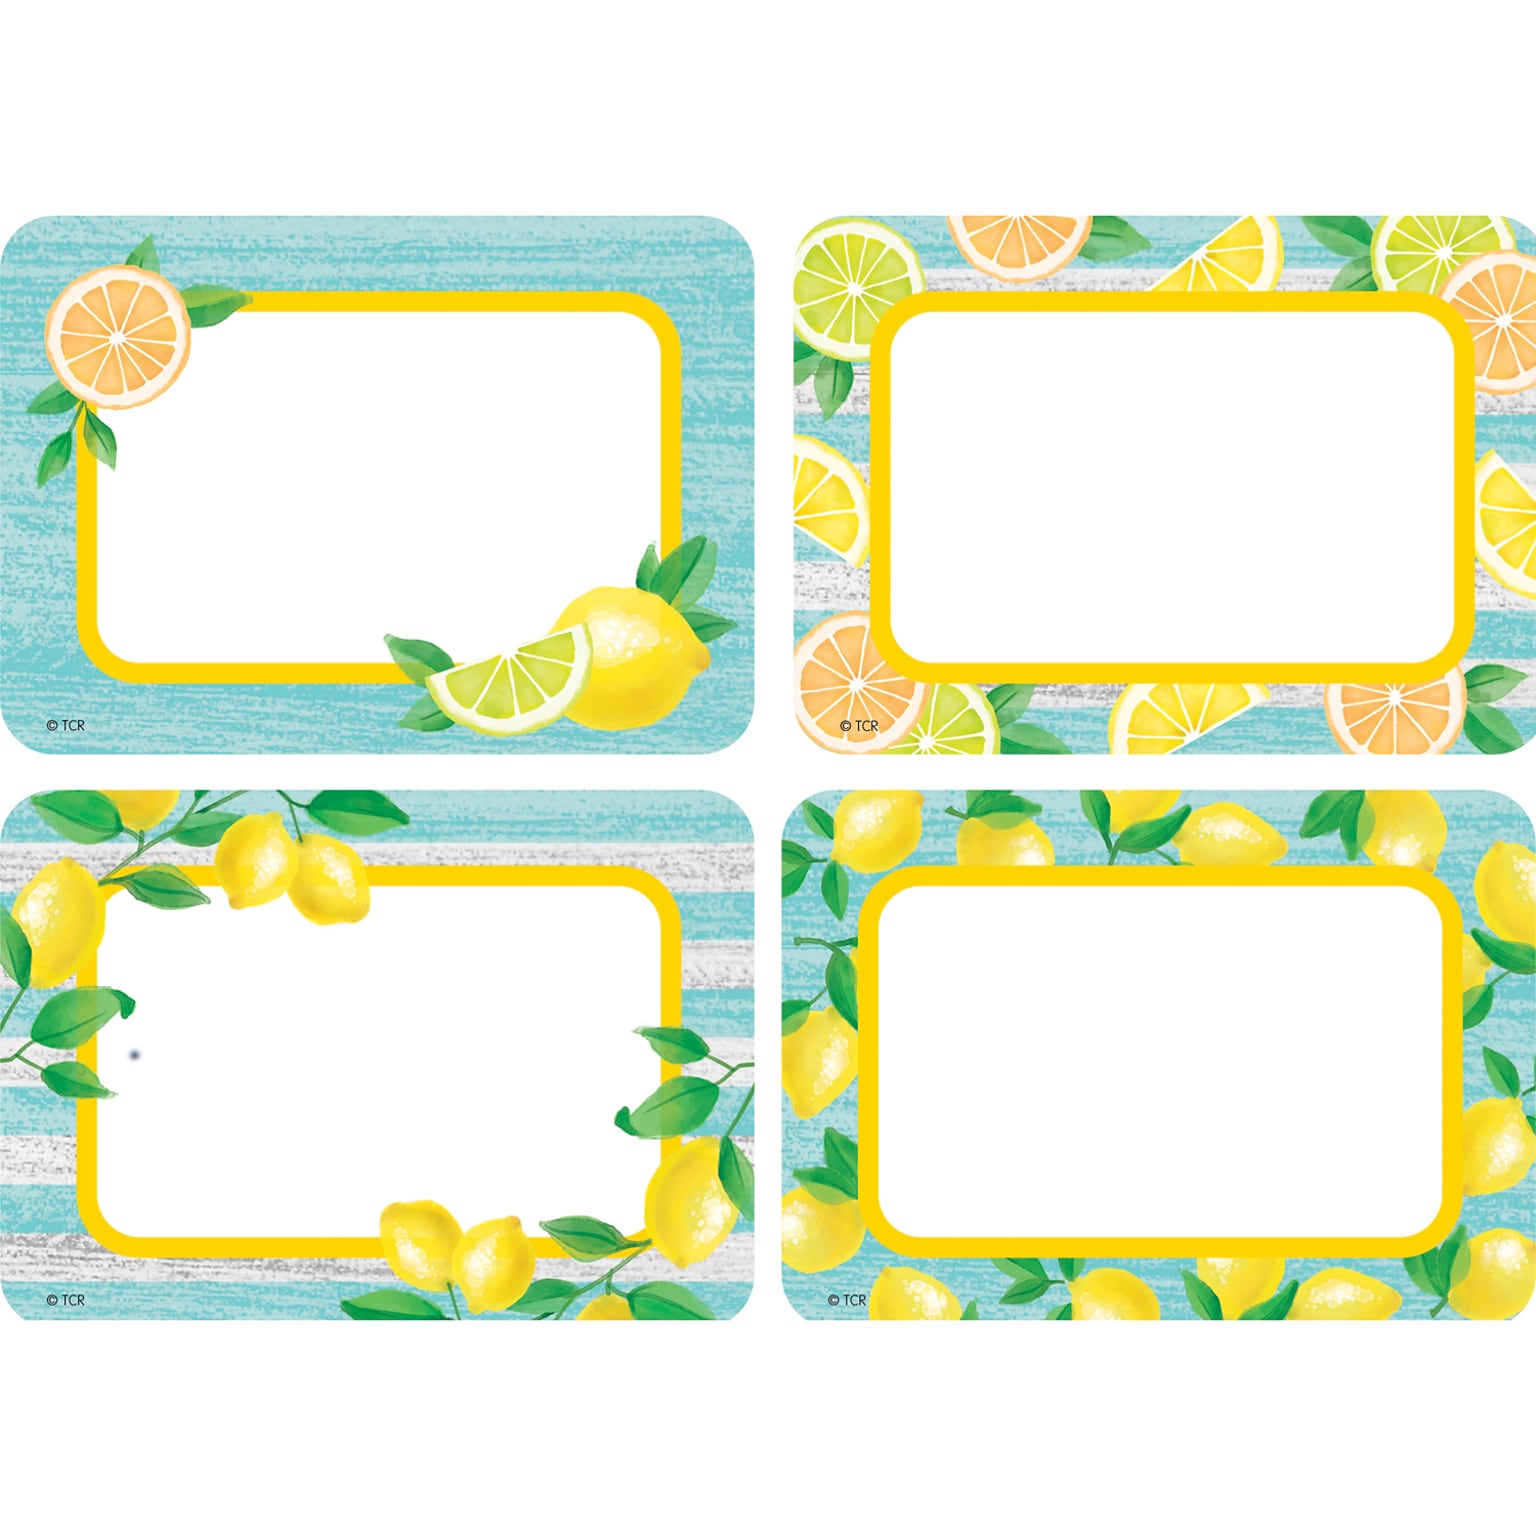 Teacher Created Resources® Lemon Zest Name Tags, 4 Designs, 3.5 x 2.5, 36 Per Pack, 6 Packs (TCR8483-6)